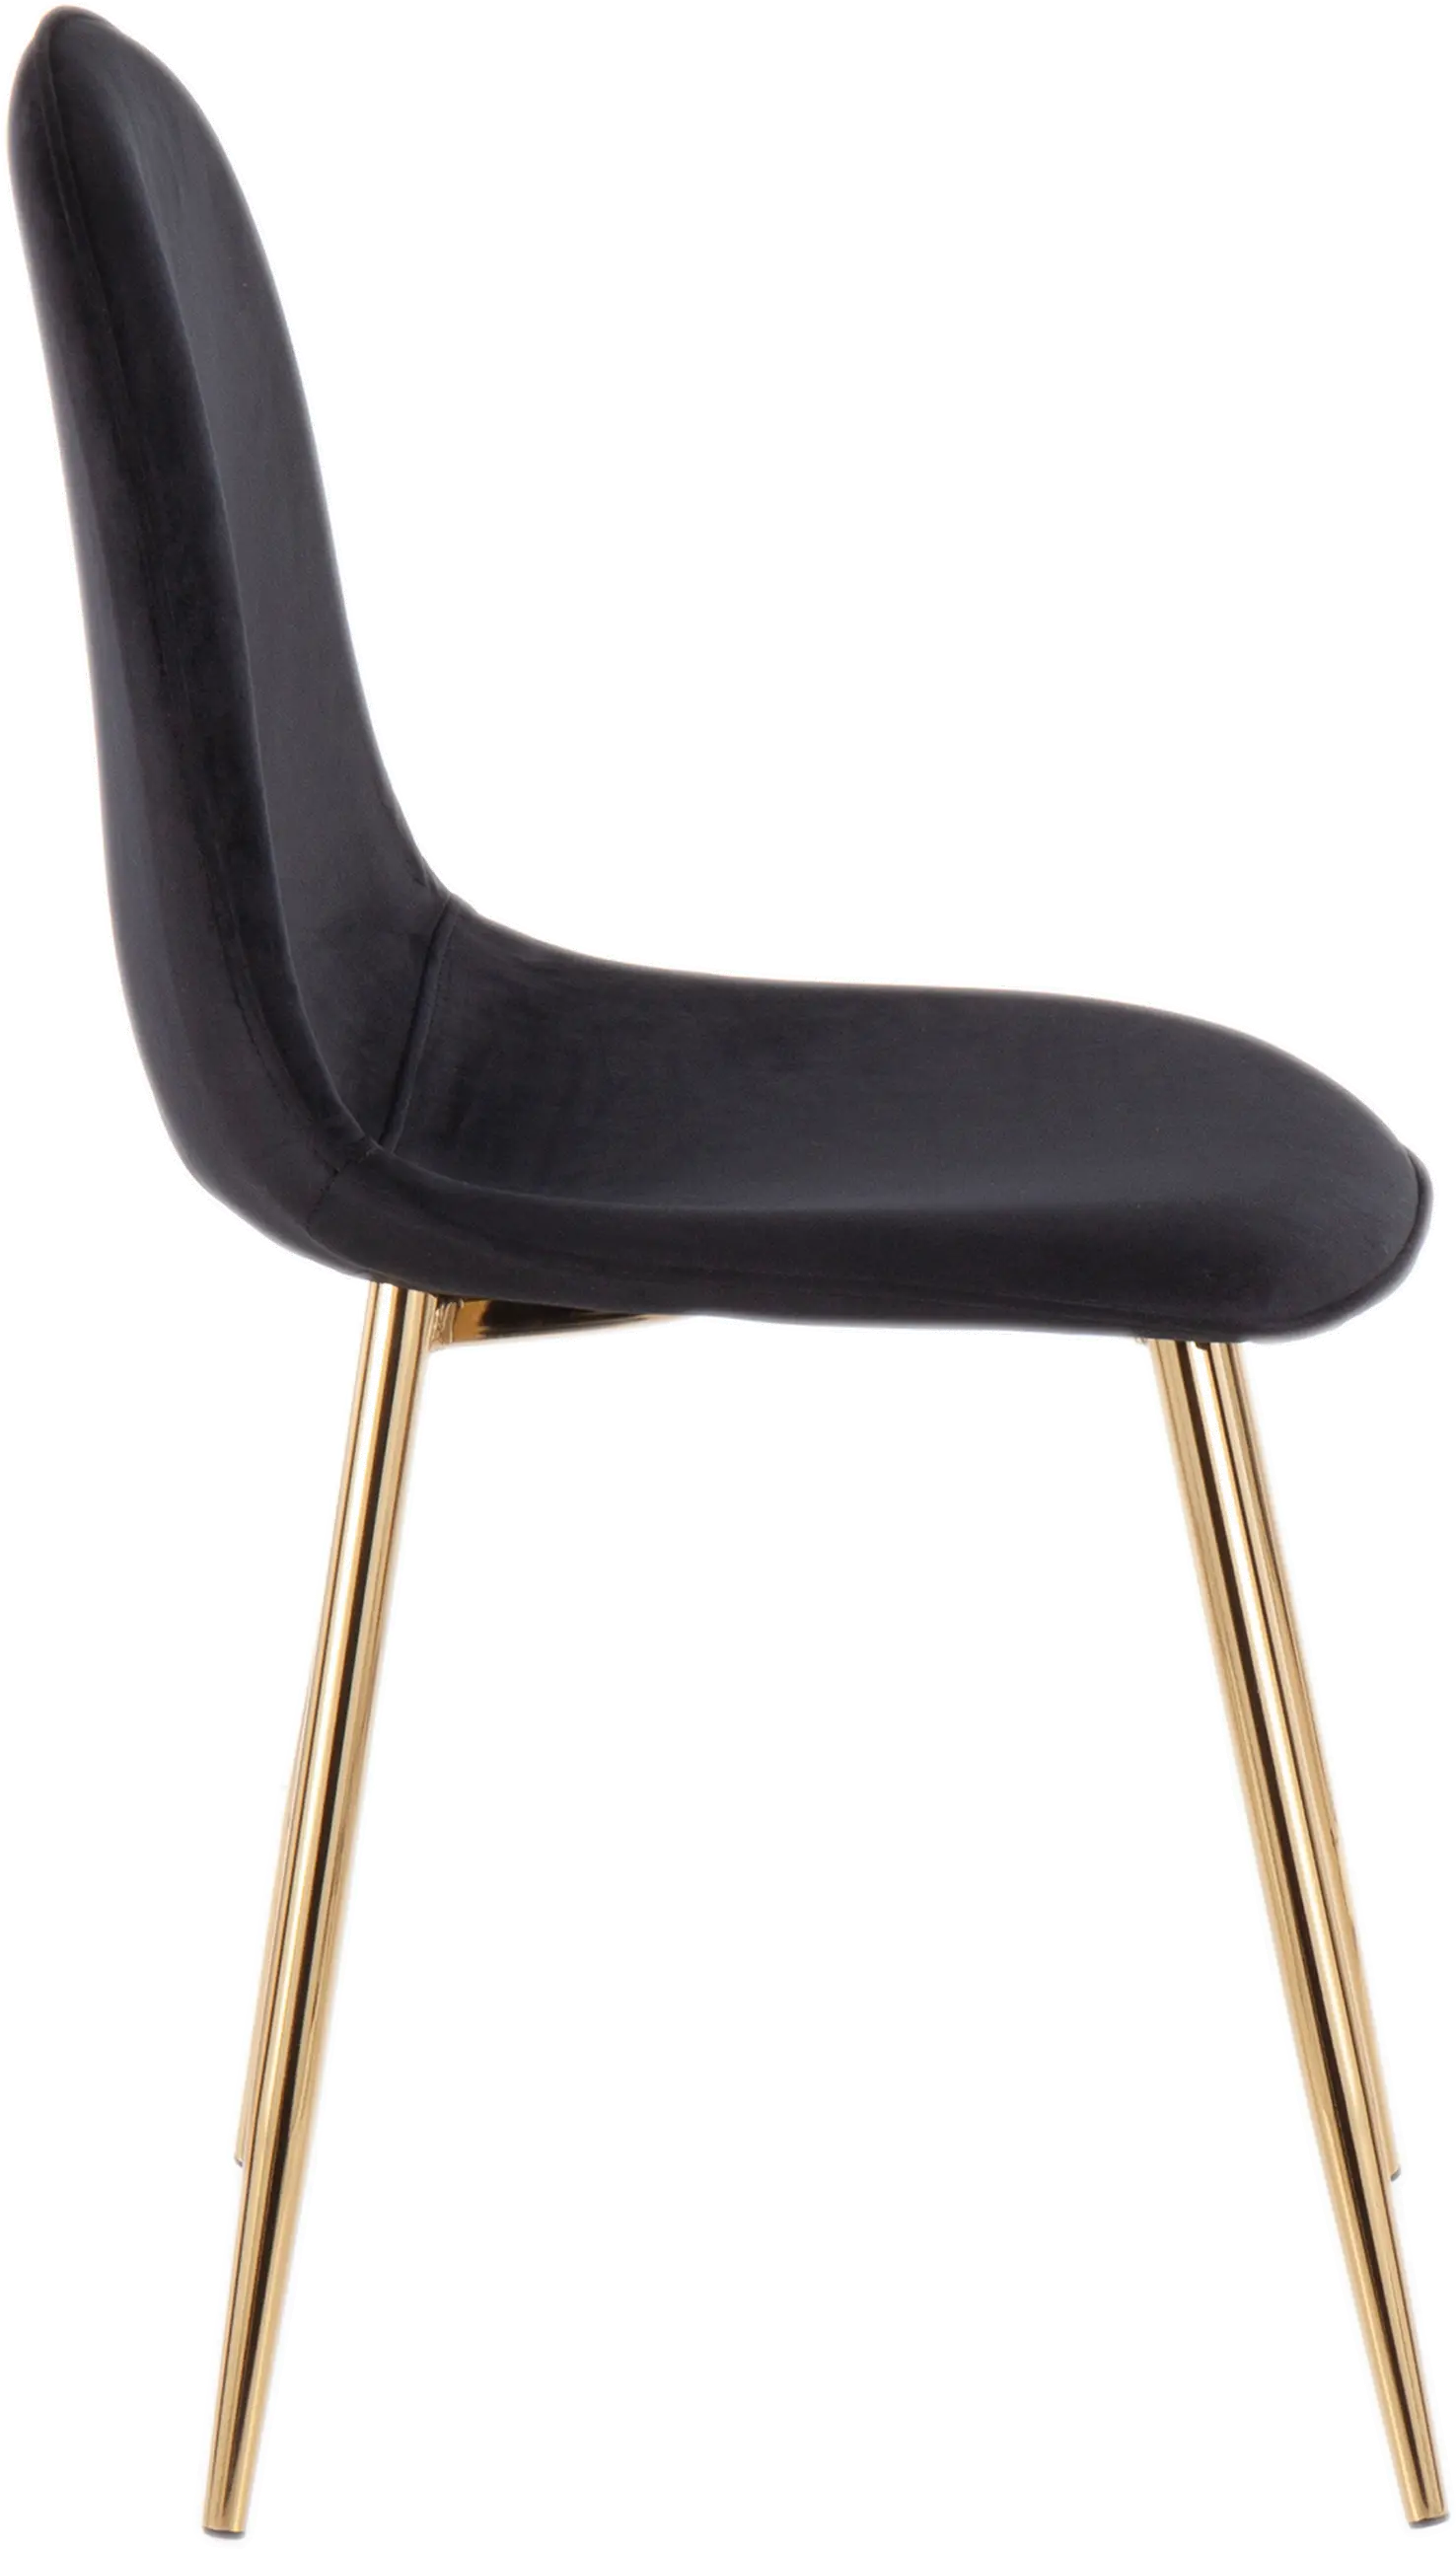 Contemporary Black and Gold Dining Room Chair (Set of 2) - Pebble